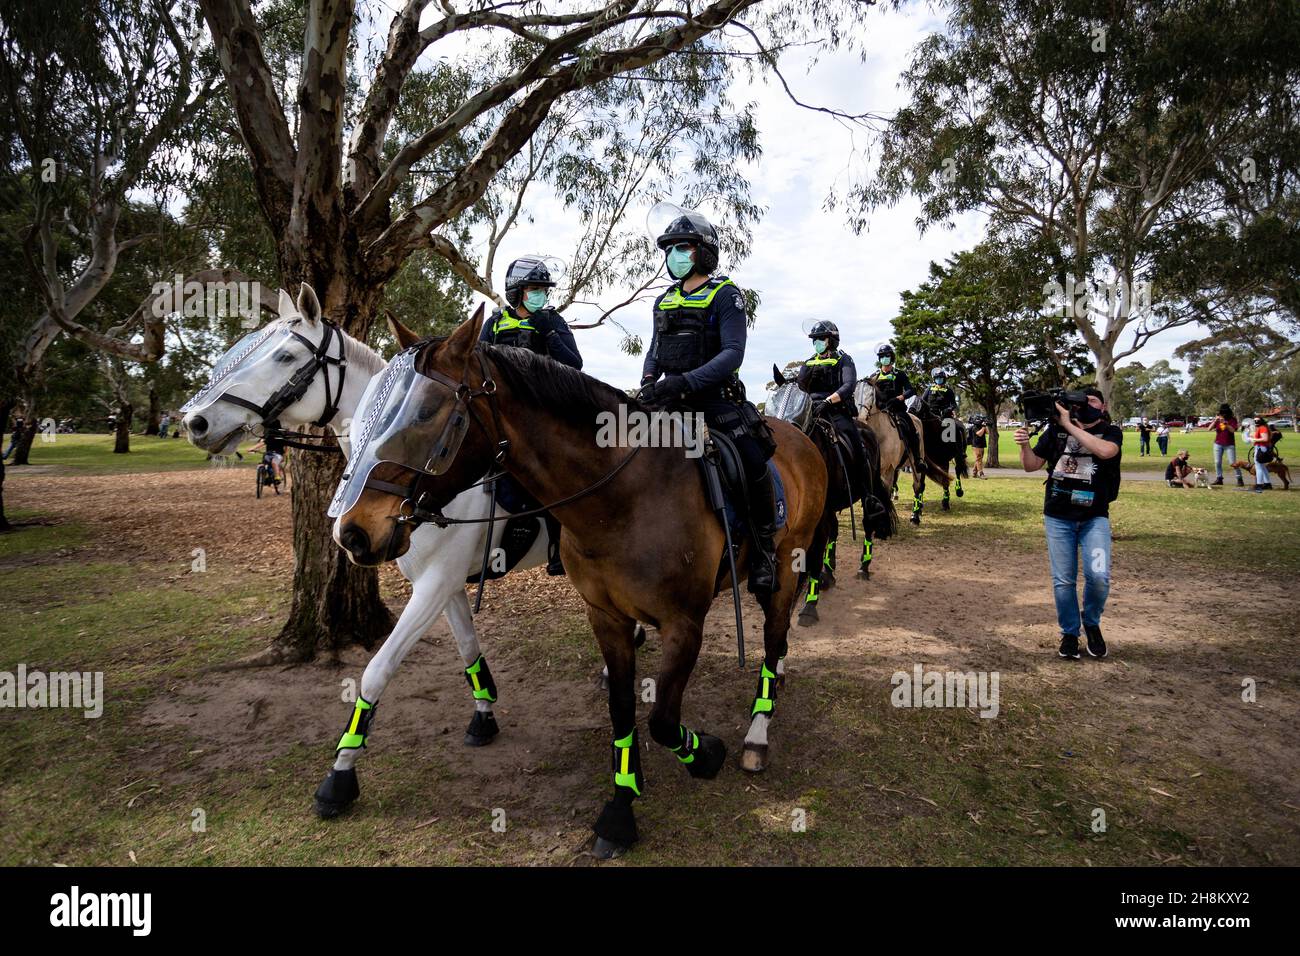 Mounted Police walk through the Elsternwick park as they push protesters back during the Freedom protest. Freedom protests are being held in Melbourne every Saturday and Sunday in response to the governments COVID-19 restrictions and continuing removal of liberties despite new cases being on the decline. Victoria recorded a further 21 new cases overnight along with 7 deaths. Stock Photo